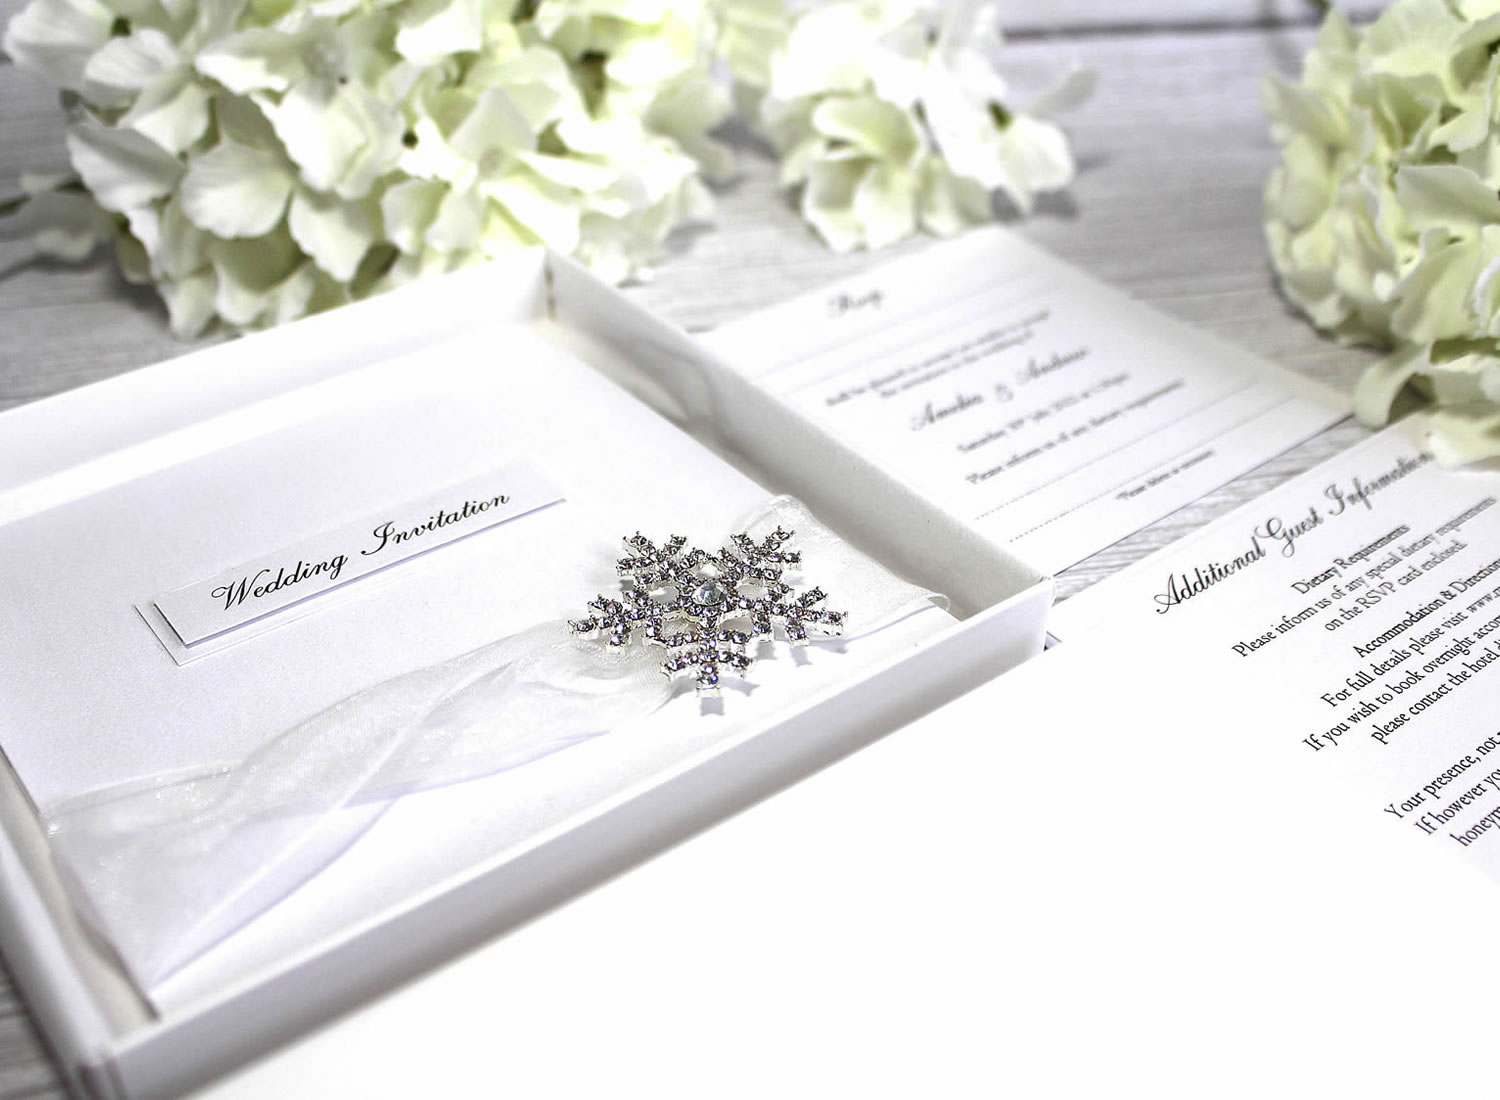 http://www.no9designs.co.uk/diamante-collection-luxury-wedding-stationery/